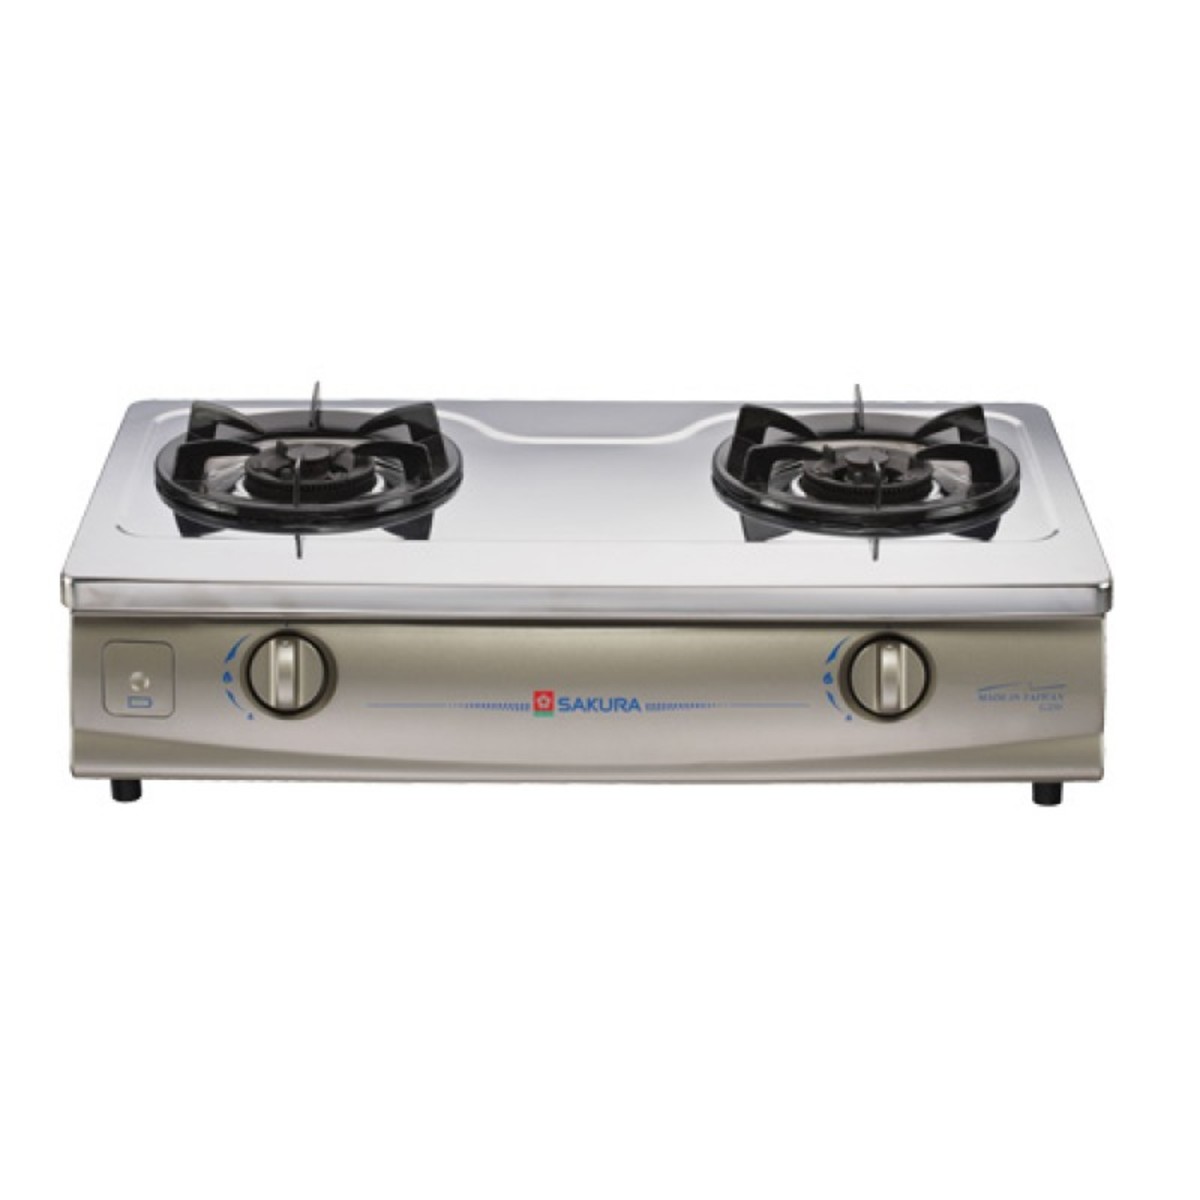 G230T   Towngas Table Top Gas Cooker   Hong Kong Warranty Genuine Products